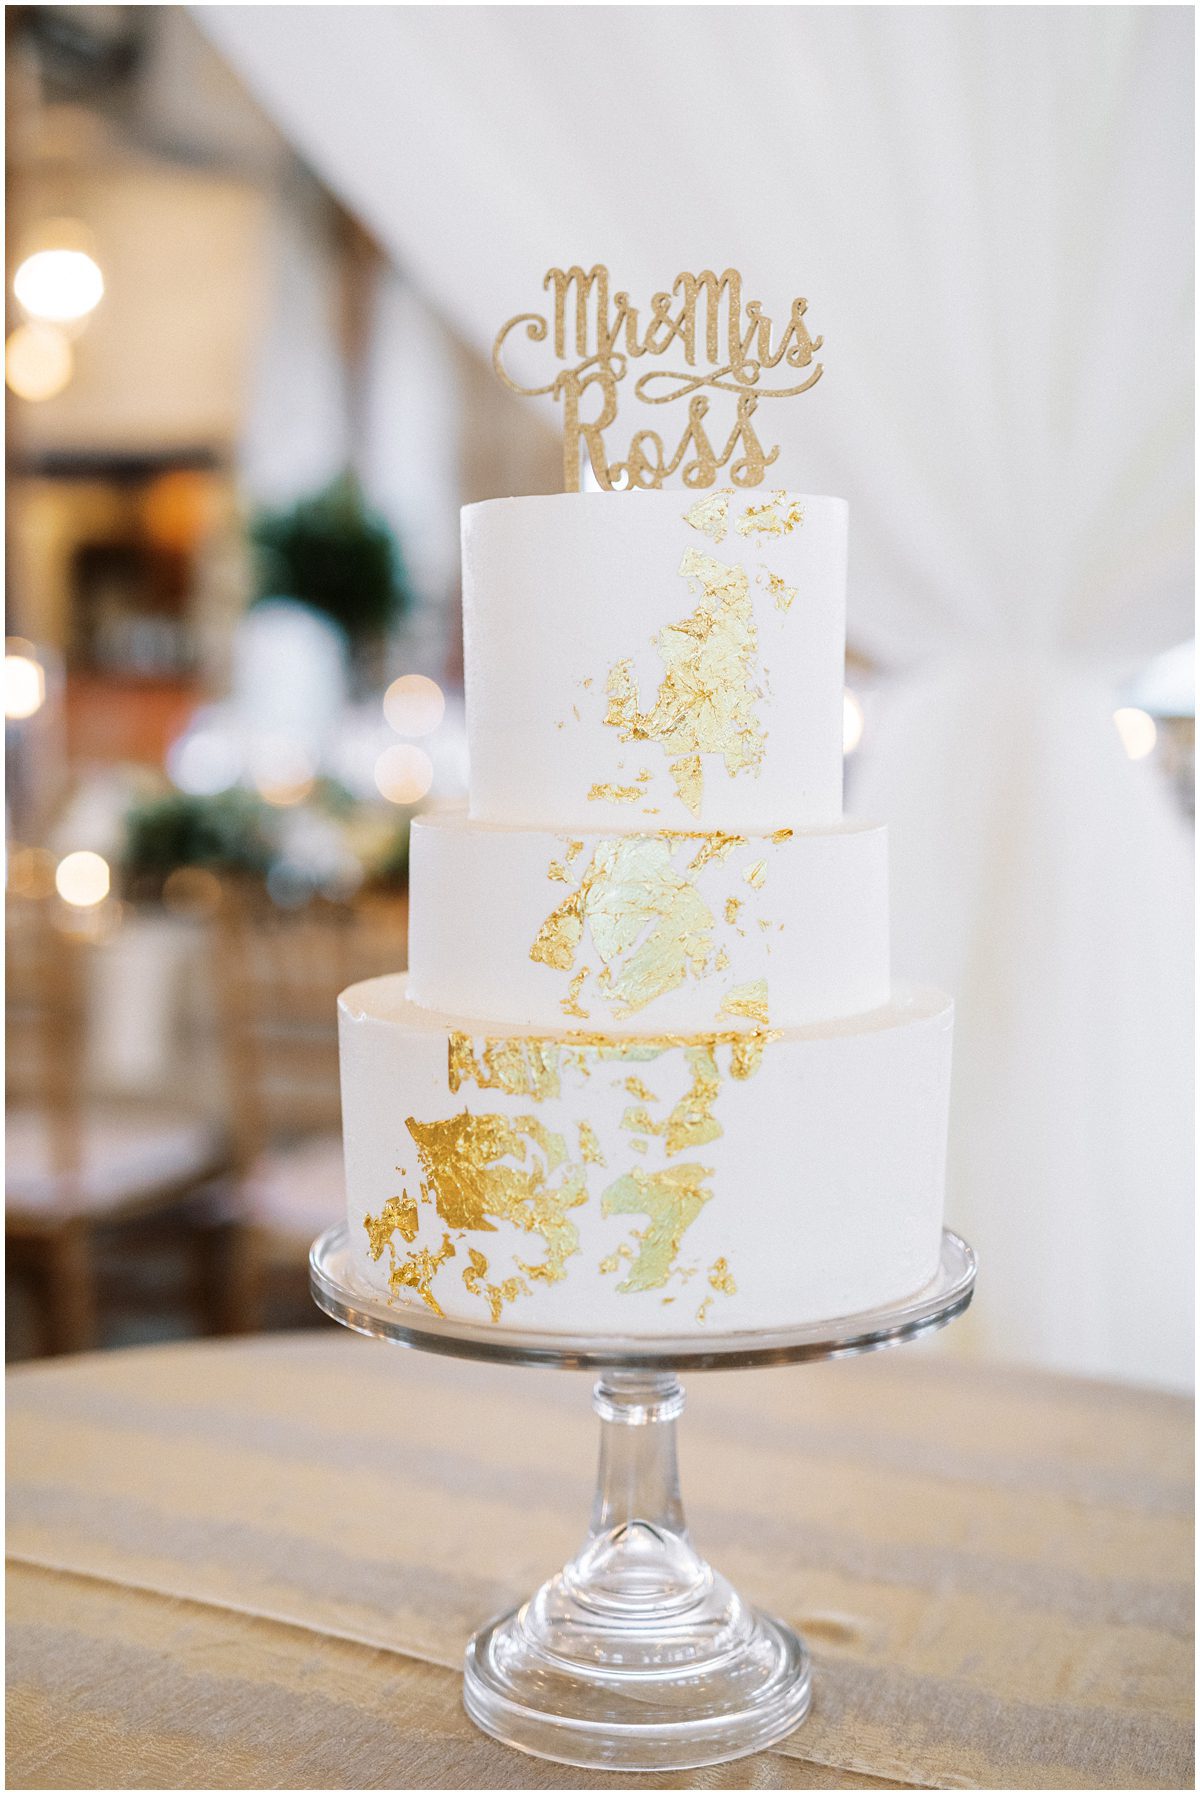 three tiered white wedding cake with gold foil detail